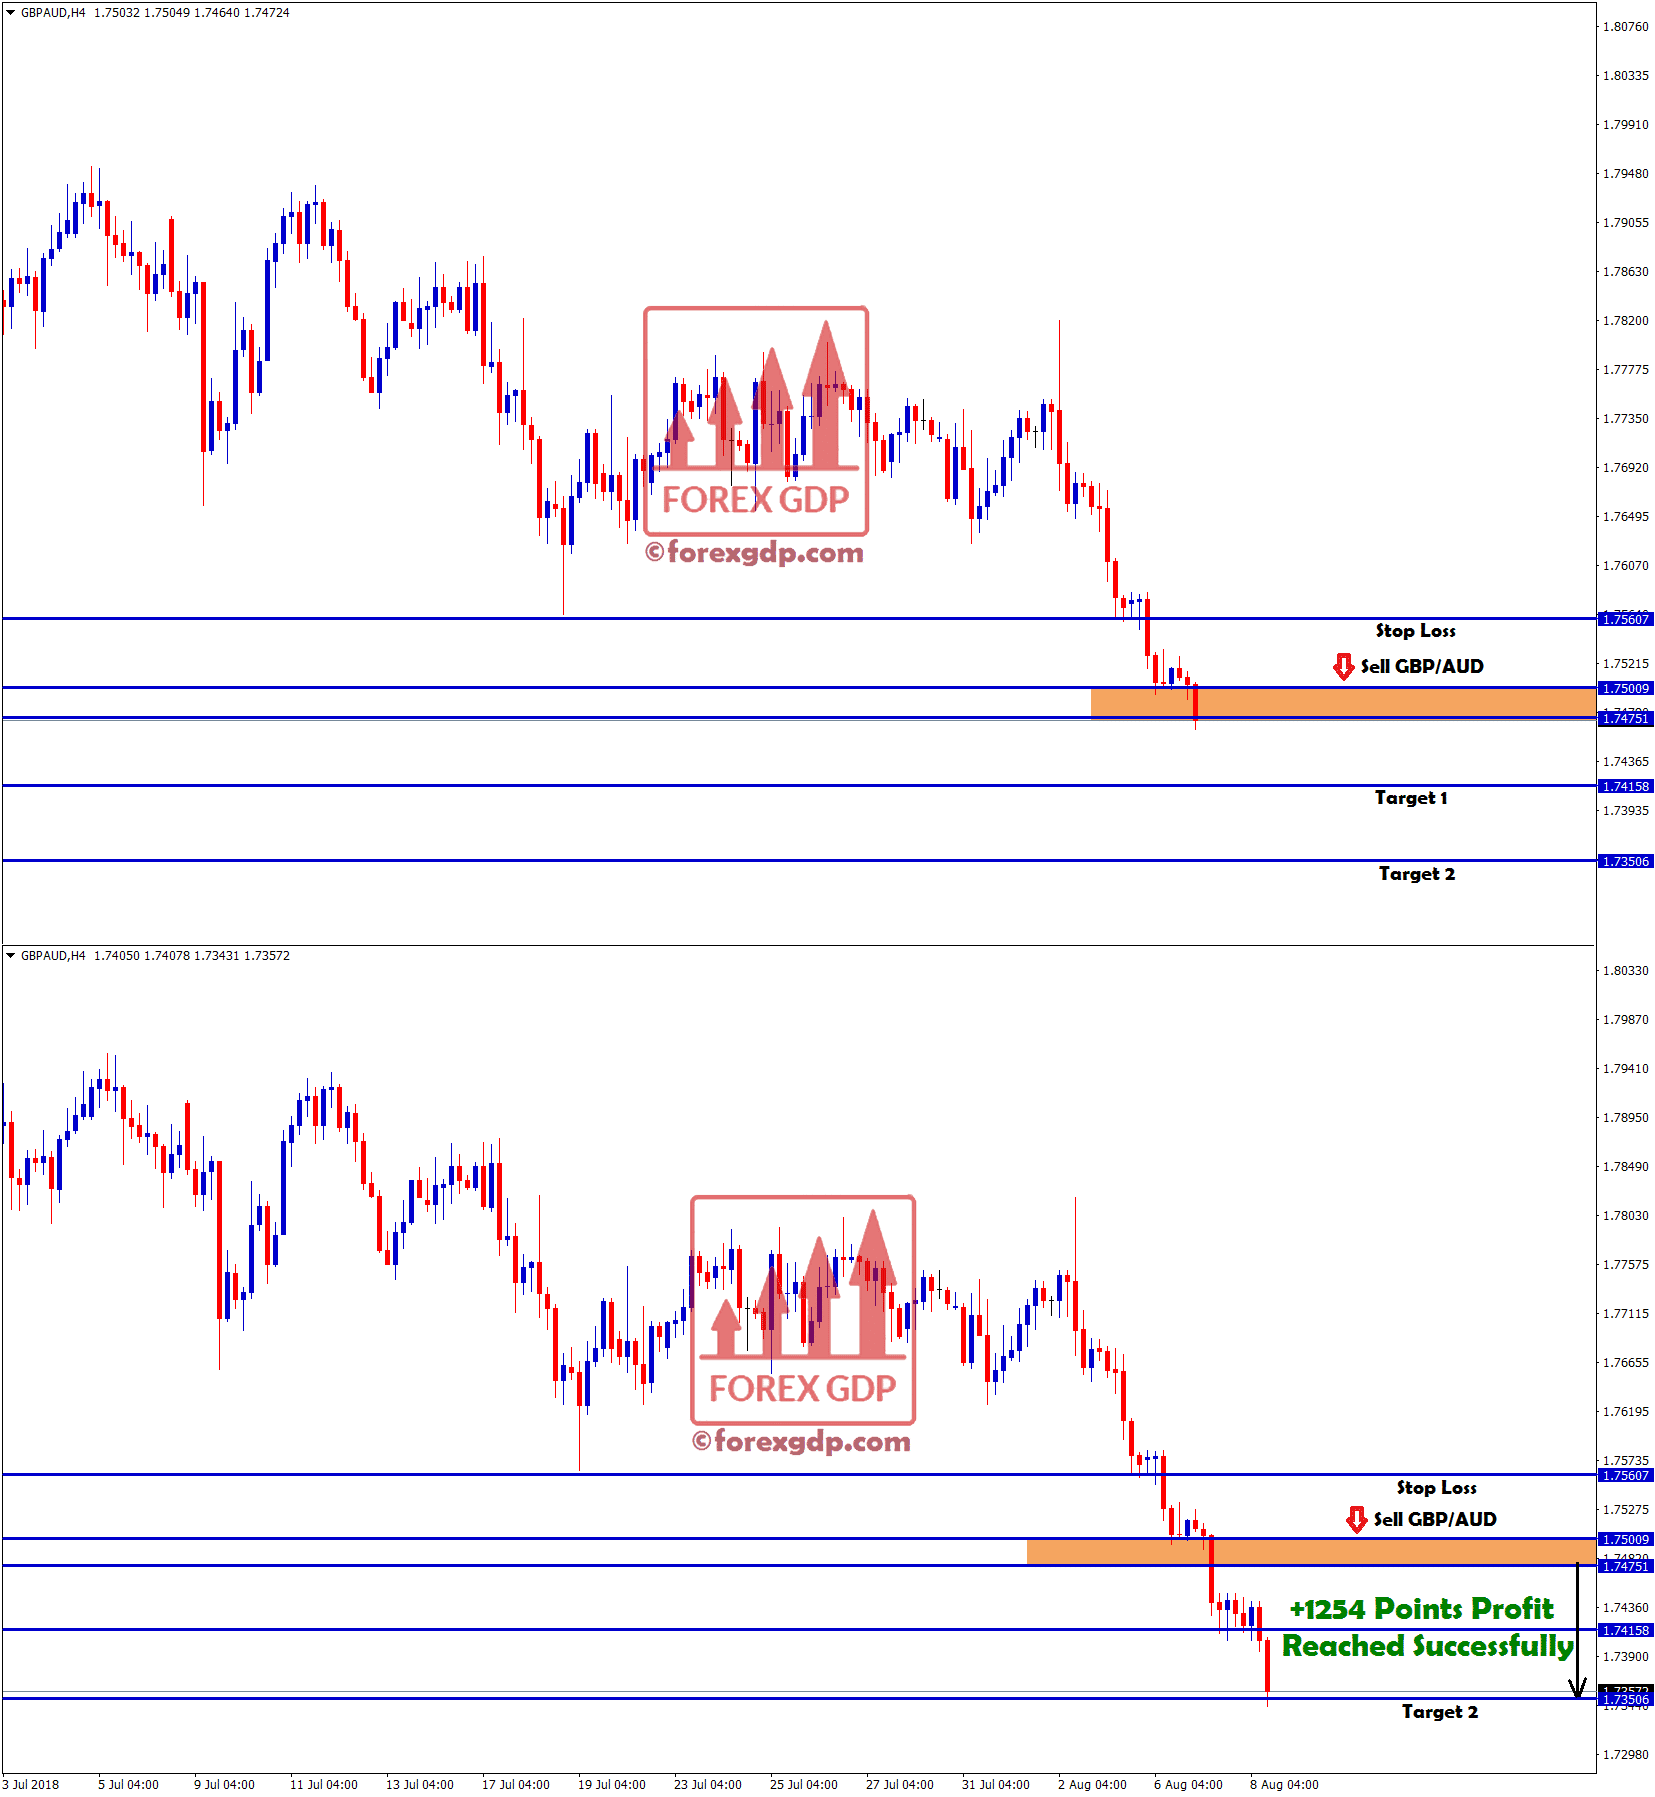 sell signal in gbp aud hits target with +1254 points profit